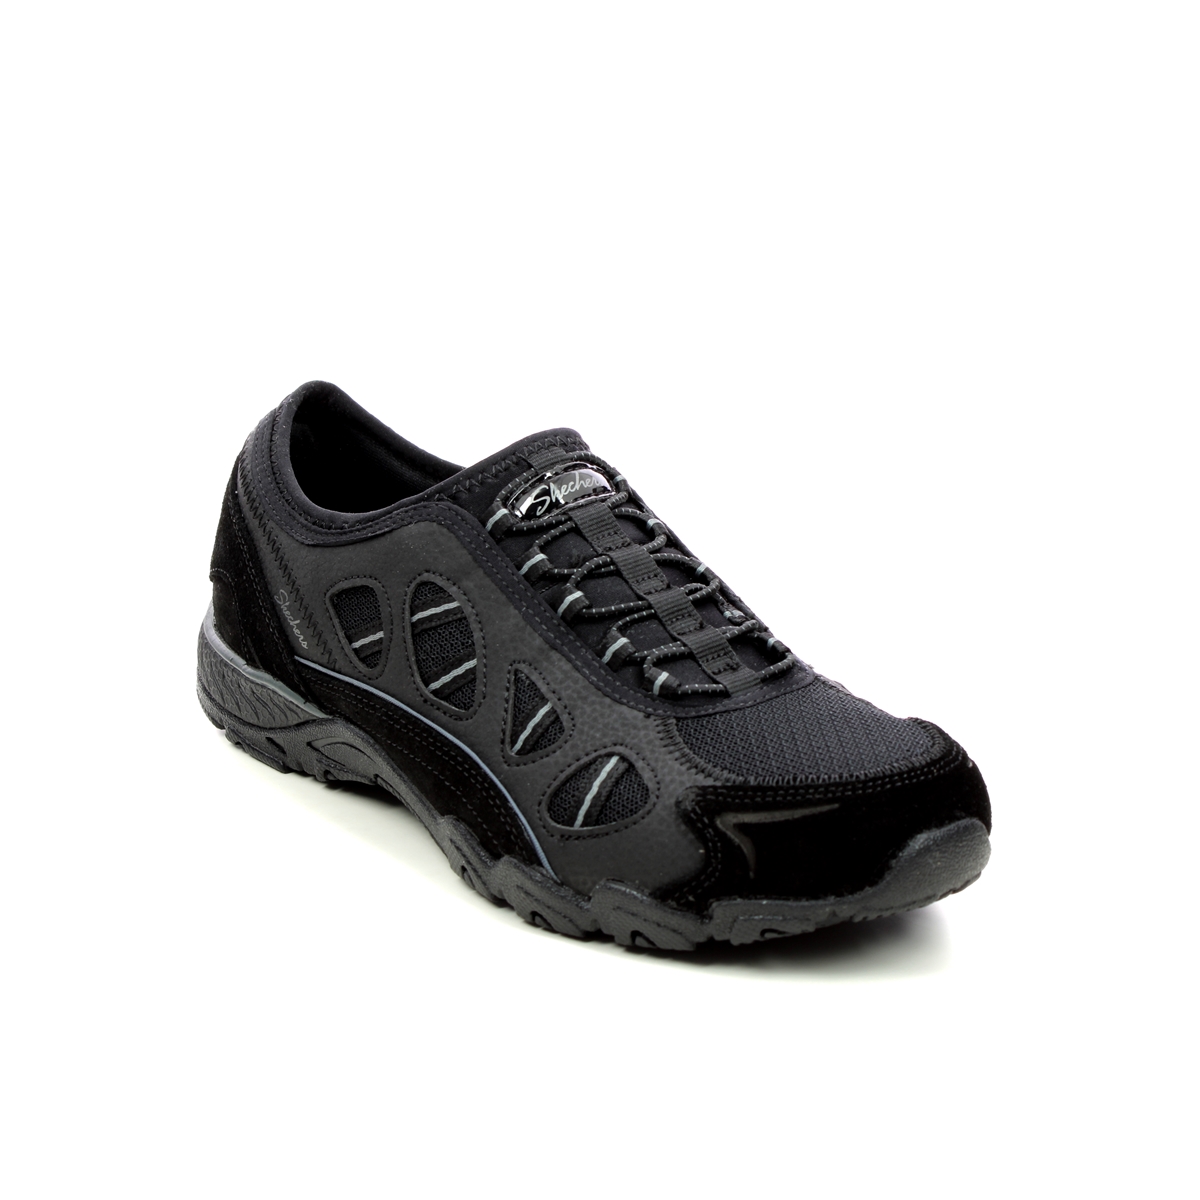 Skechers Hot Ticket 2 BKCC Black Charcoal Grey Womens trainers 100558 in a Plain Leather and Textile in Size 8